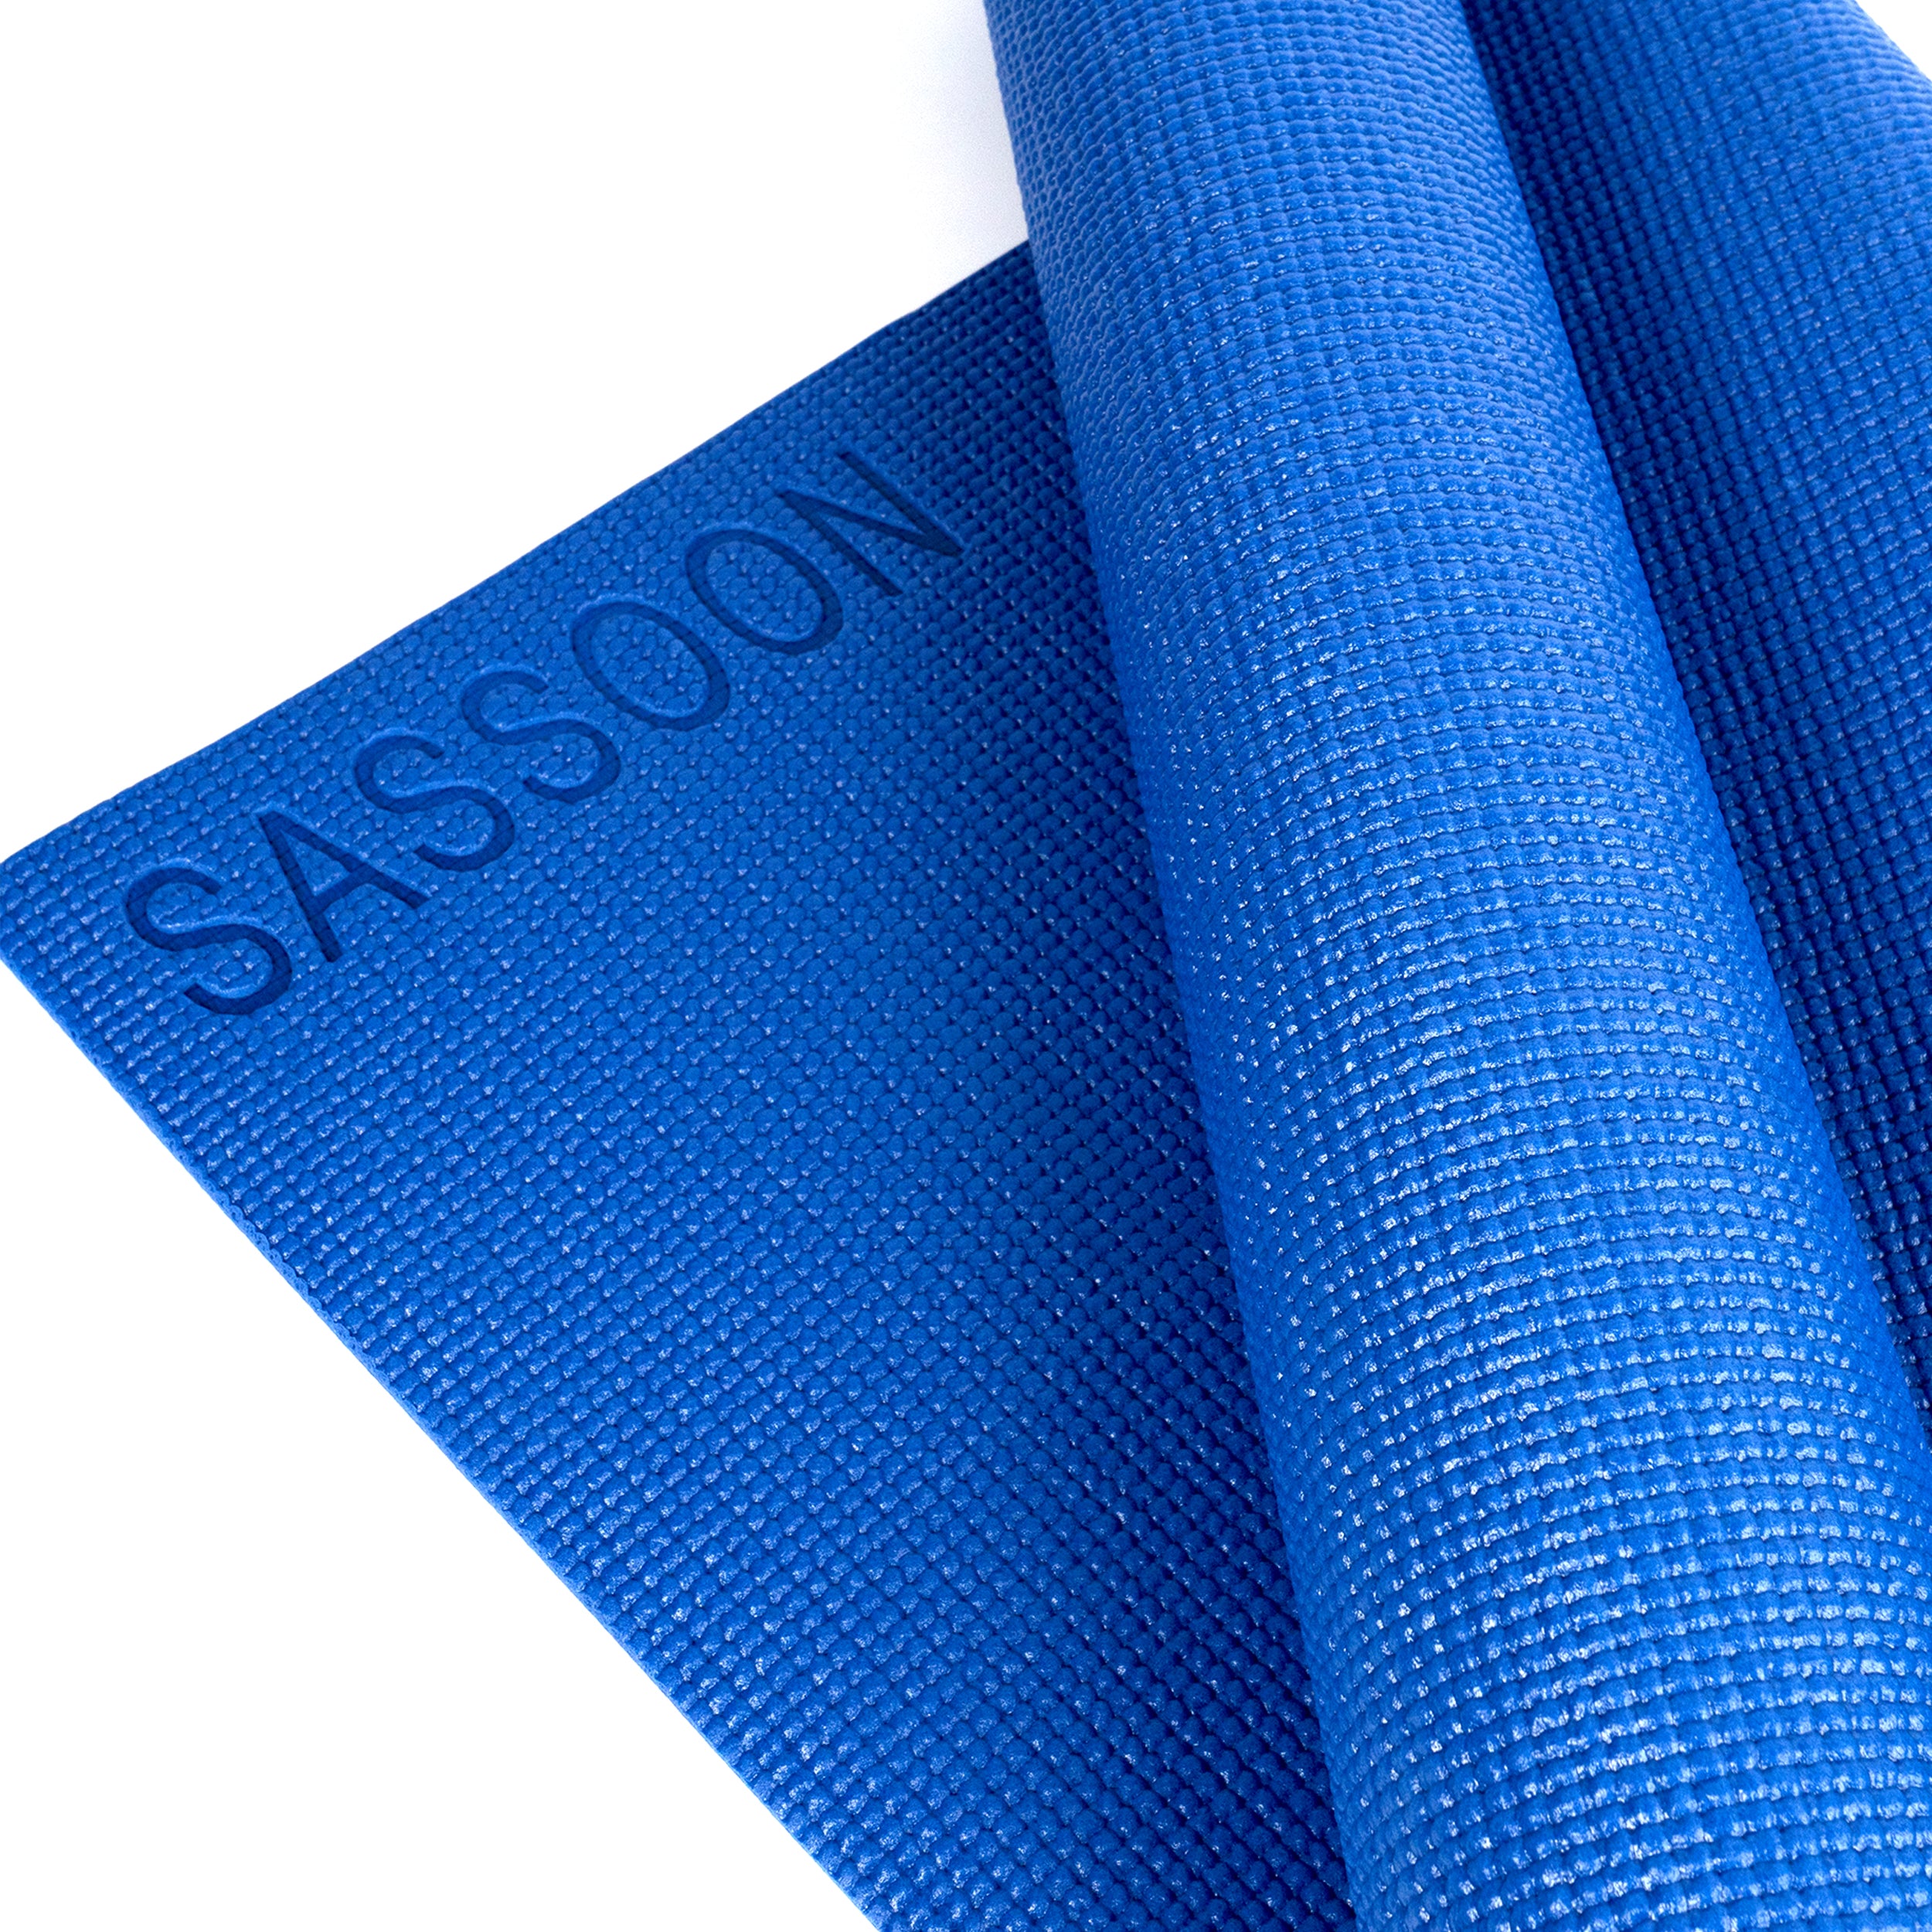 Buy Textured Anti Skid Yoga Mat (Blue) at 36% OFF Online